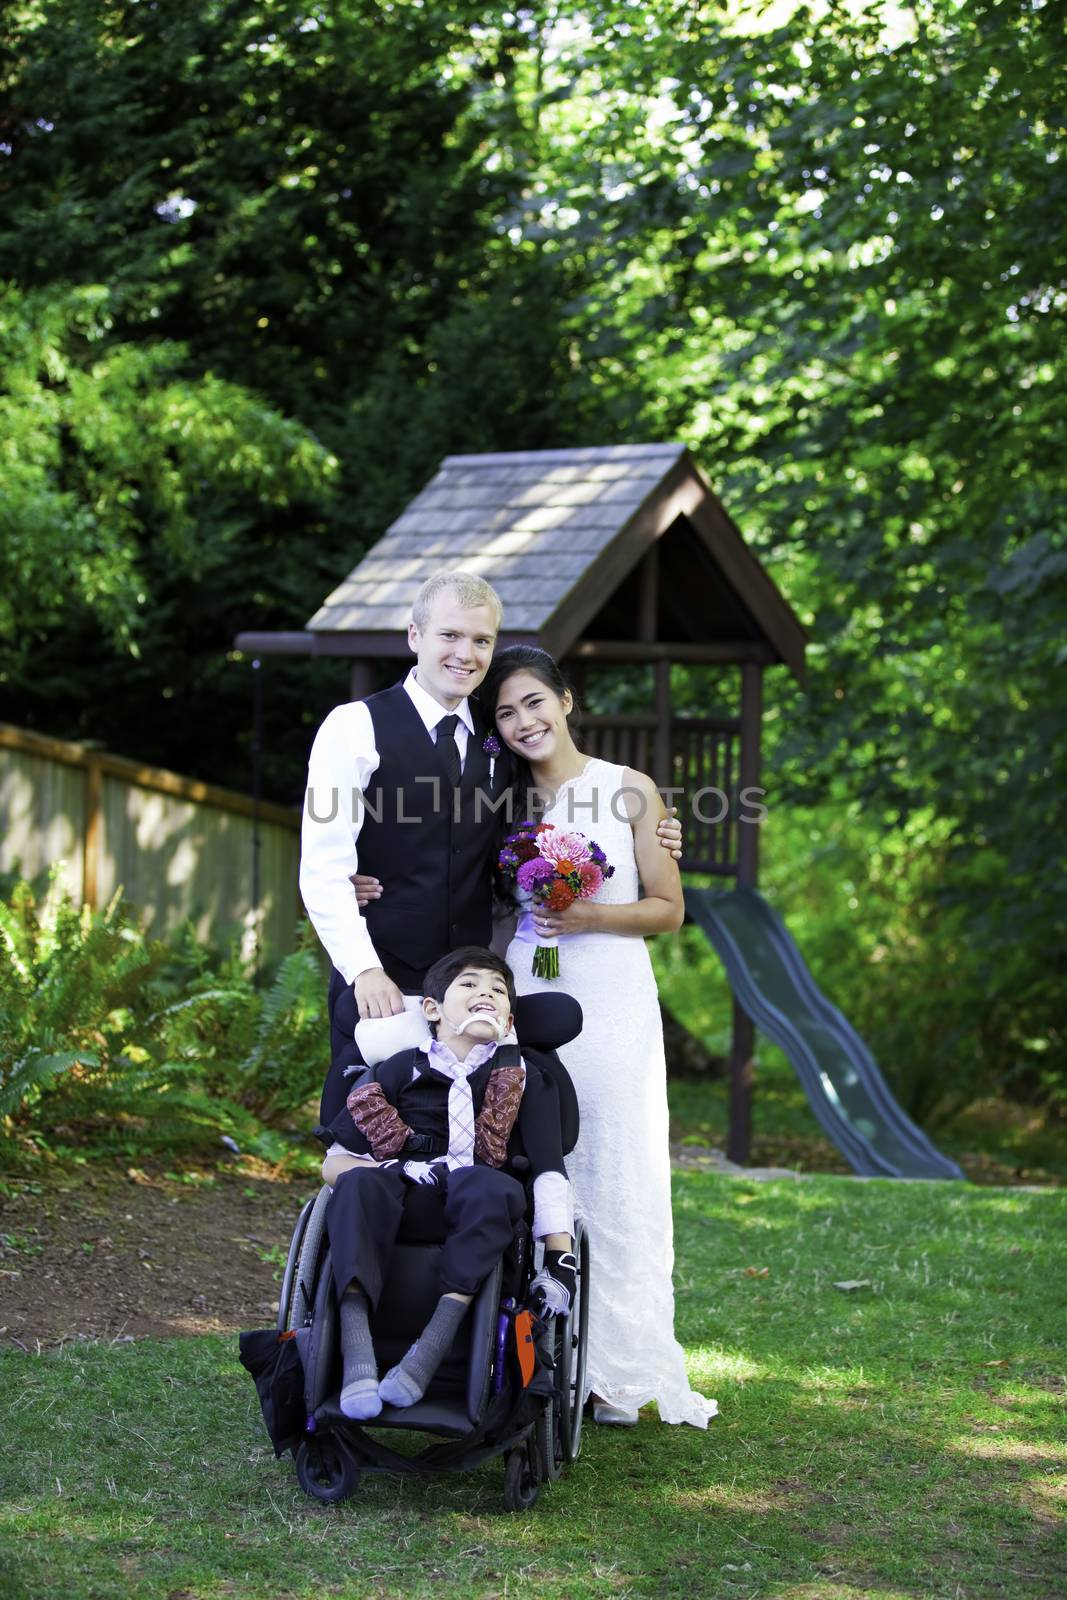 Interracial bride and groom standing with her disabled little bo by jarenwicklund